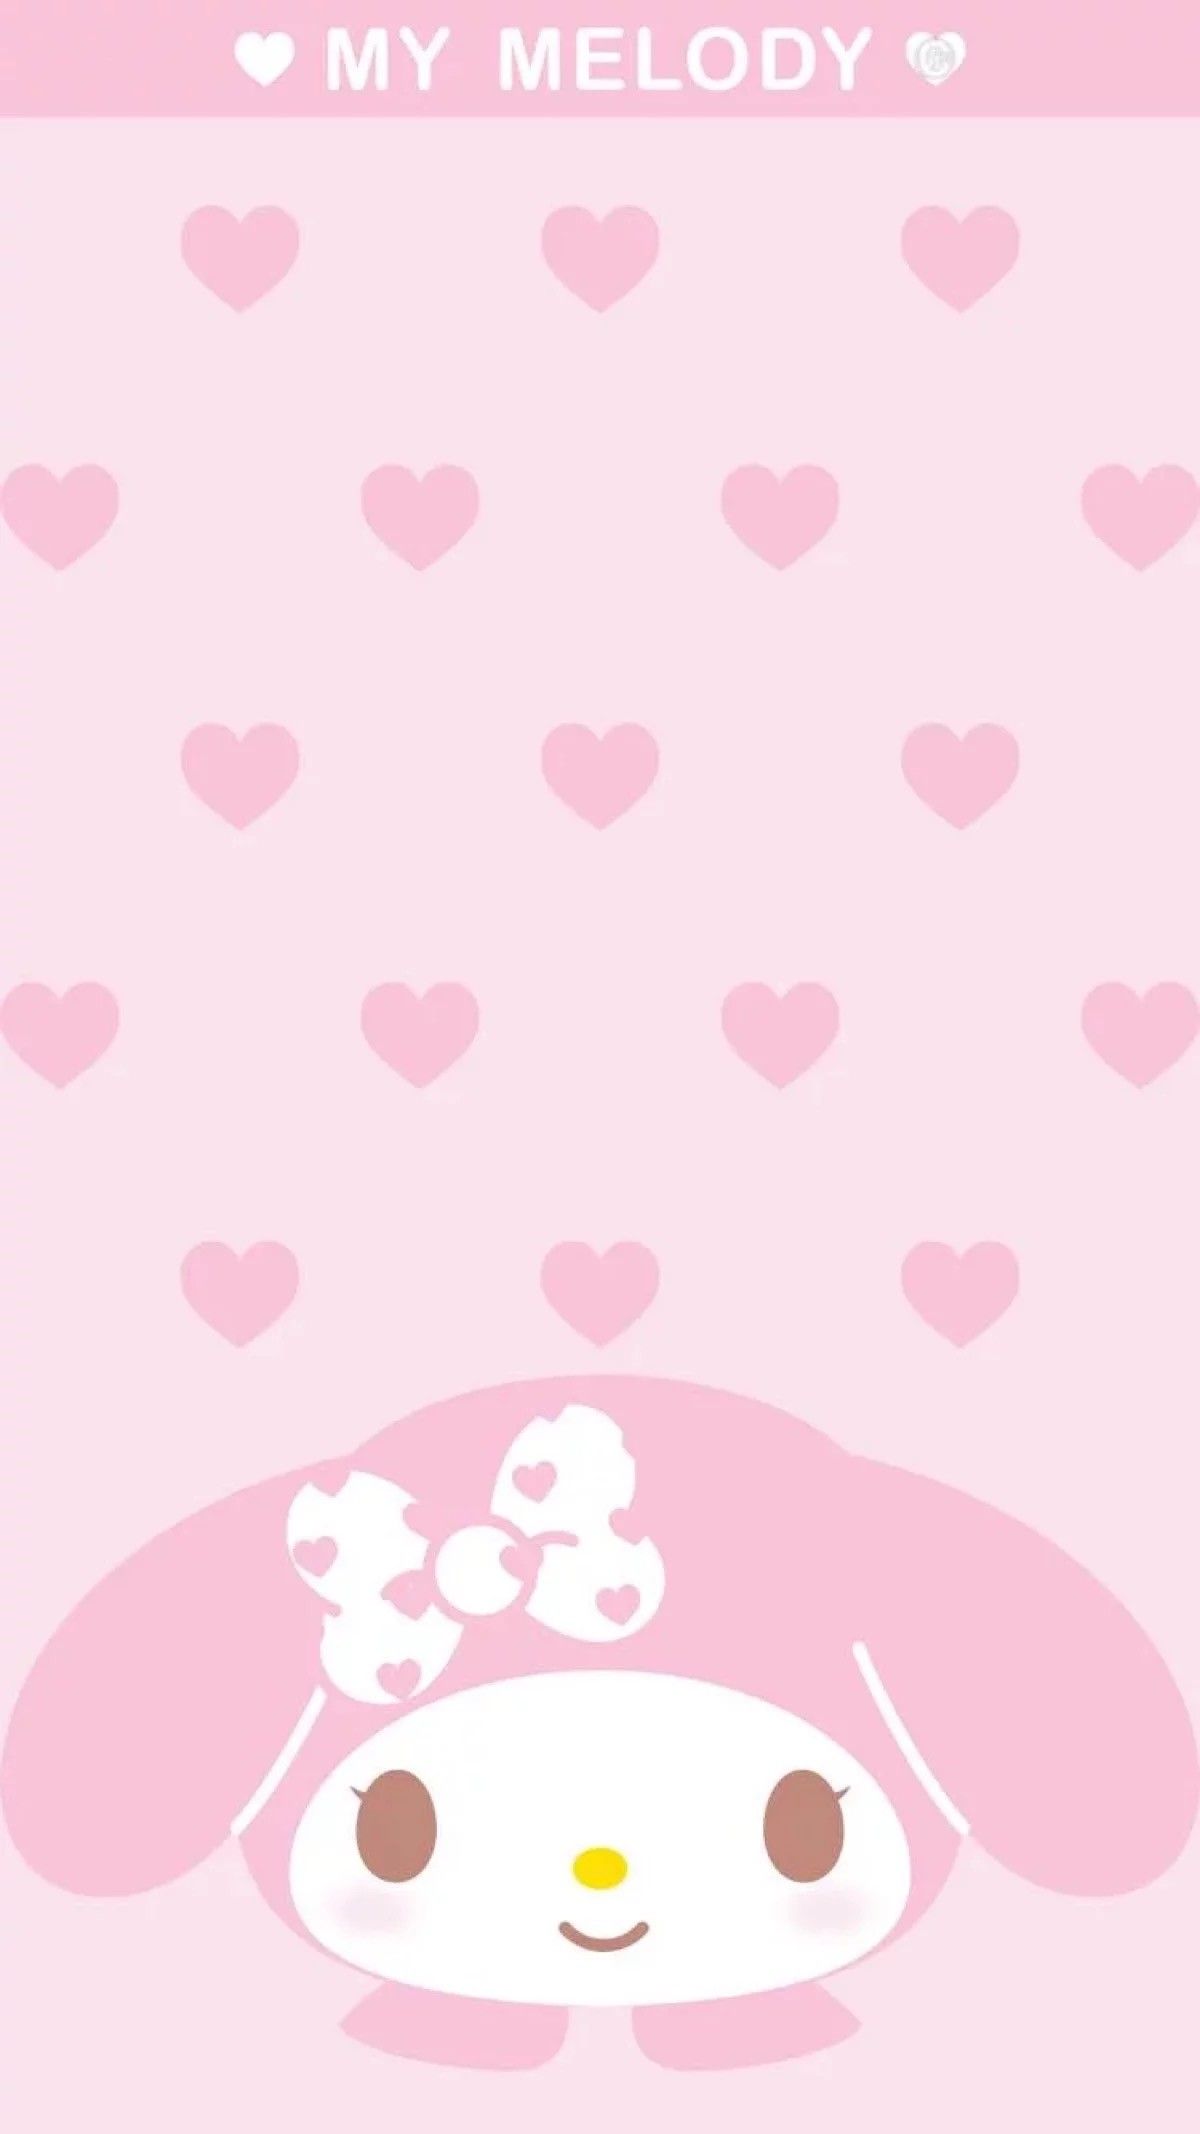 My Melody, iPhone Wallpaper, Hello Kitty, Sanrio, Chibi, Blog, Funds